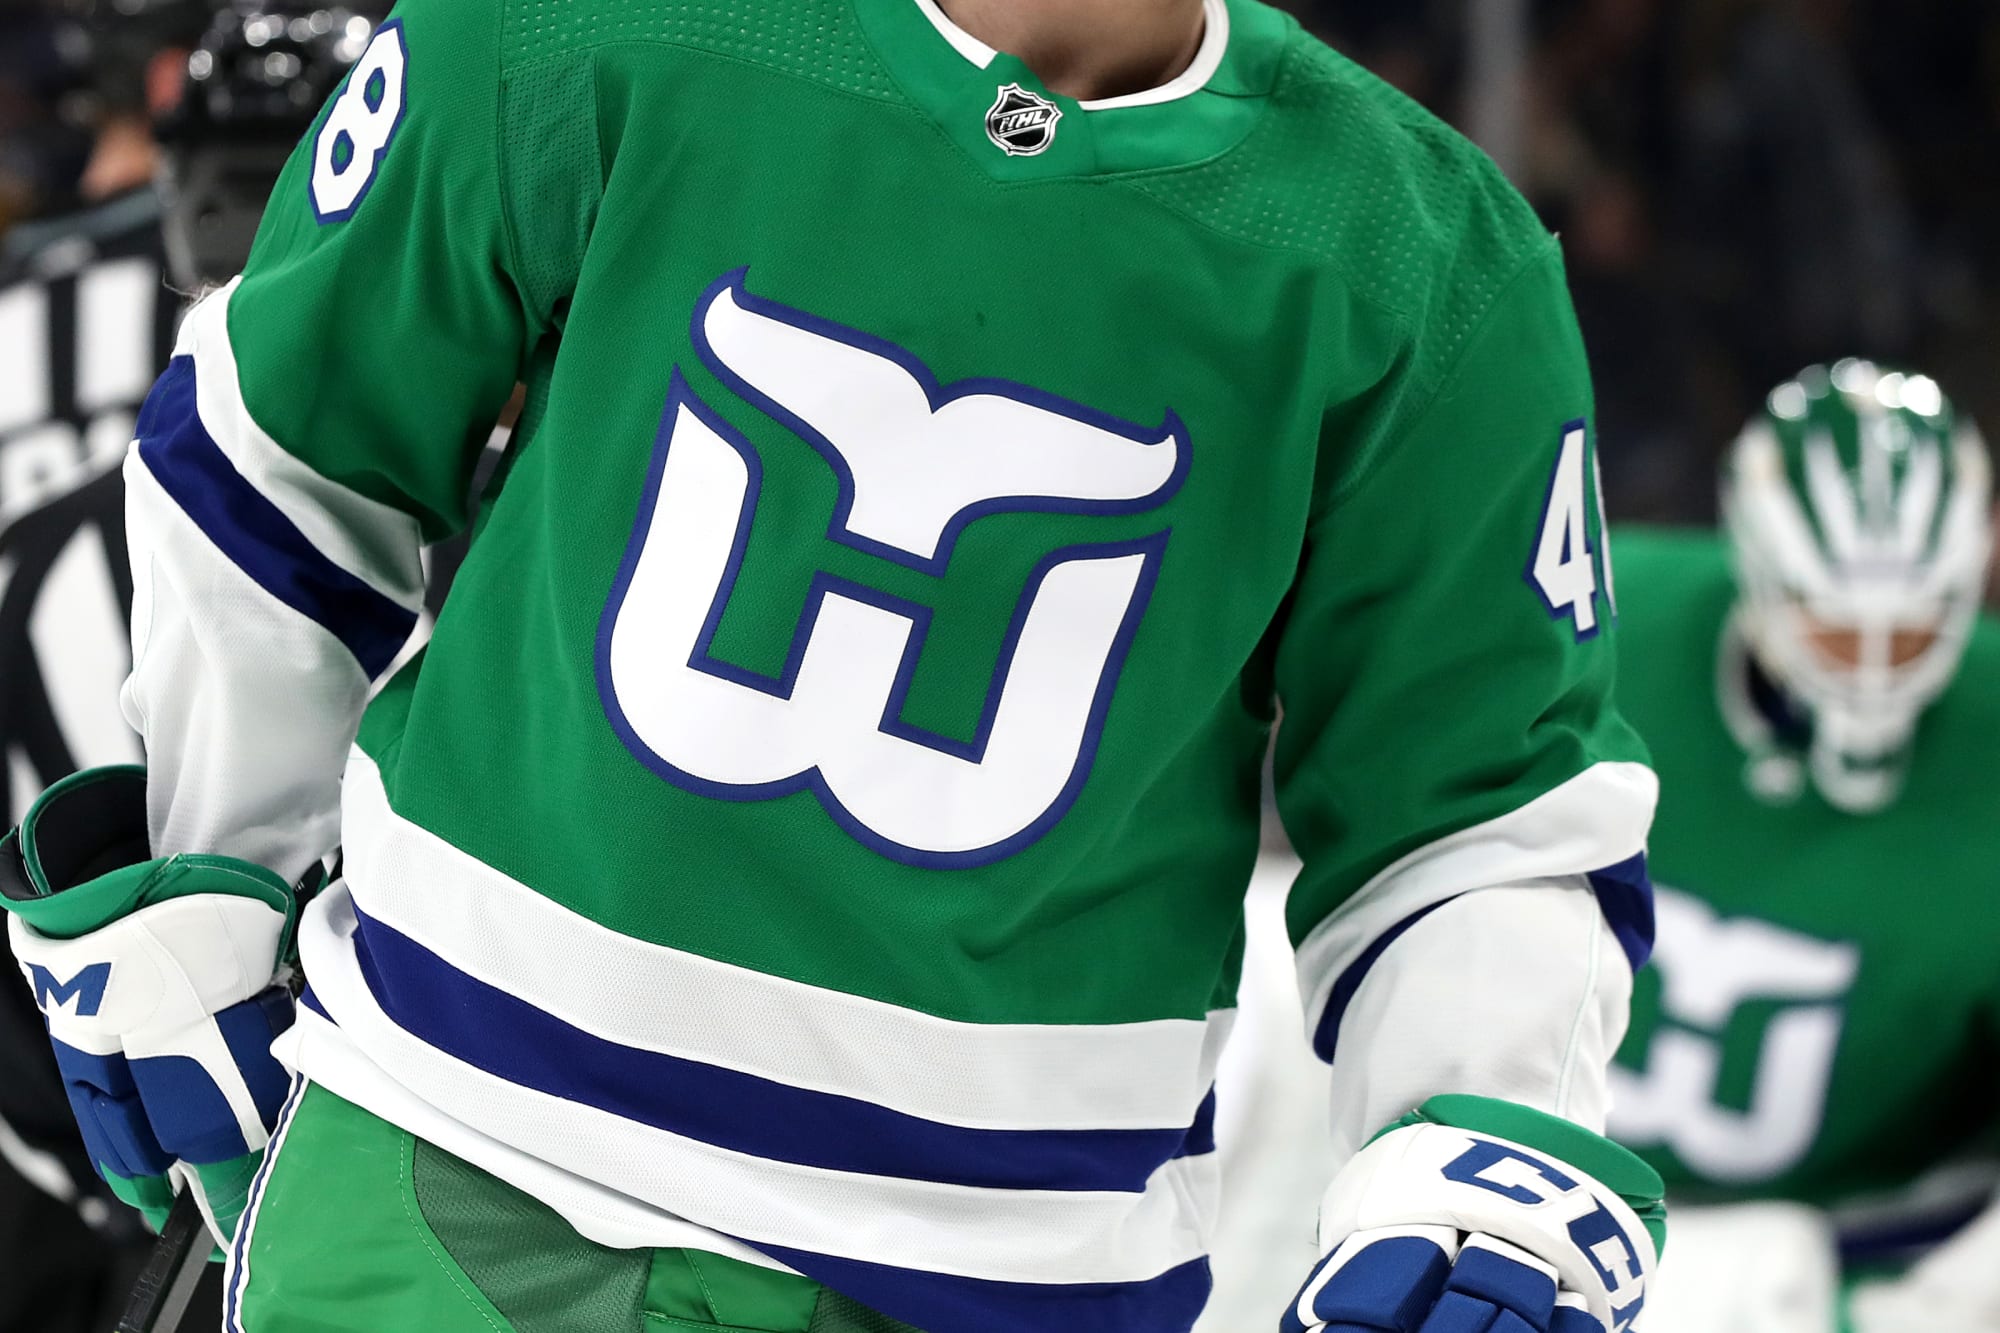 Sports with Navo - Carolina Hurricanes will wear Hartford Whalers jerseys  as a part of “Whalers Night on December 23rd vs the Bruins #NHL #Hurricanes  #Whalers #SportswithNavo